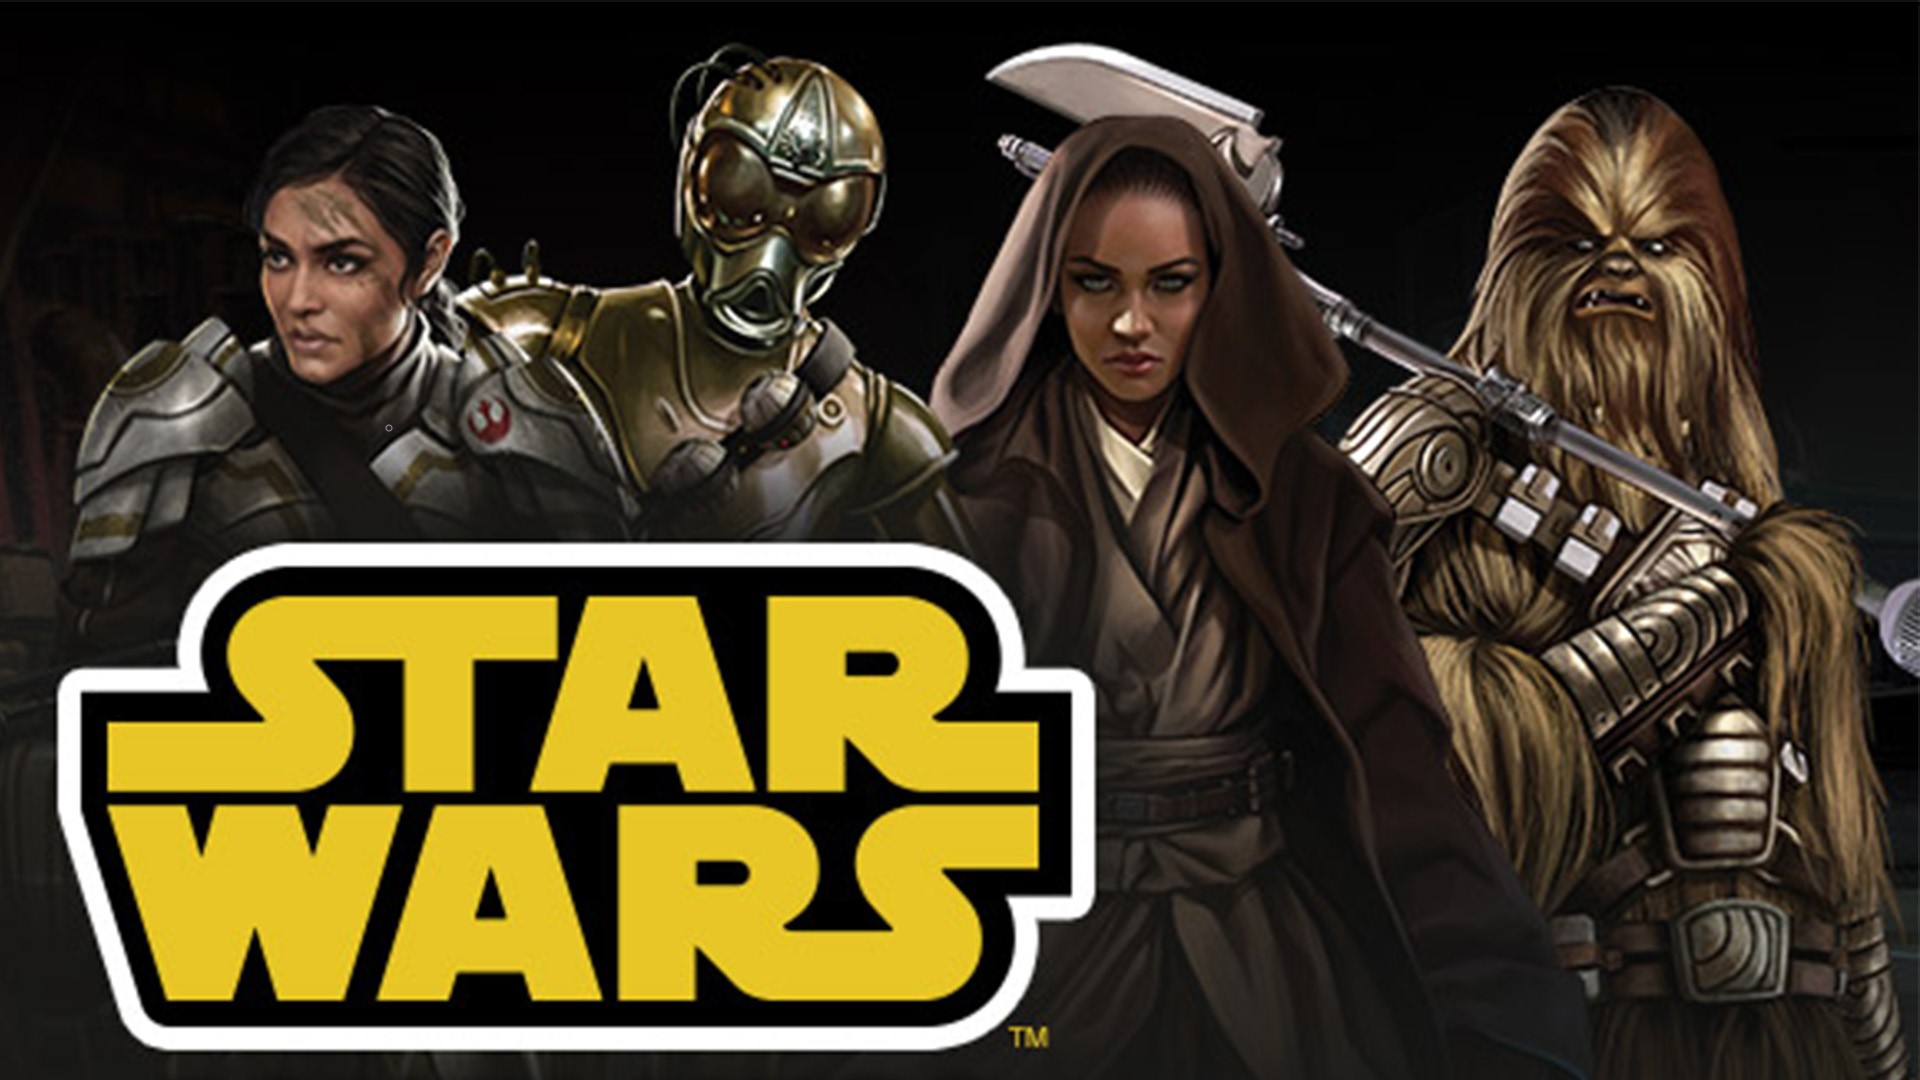 Best tabletop RPGS - Star Wars roleplaying game artwork showing the Star Wars logo and characters including a droid and a wookiee